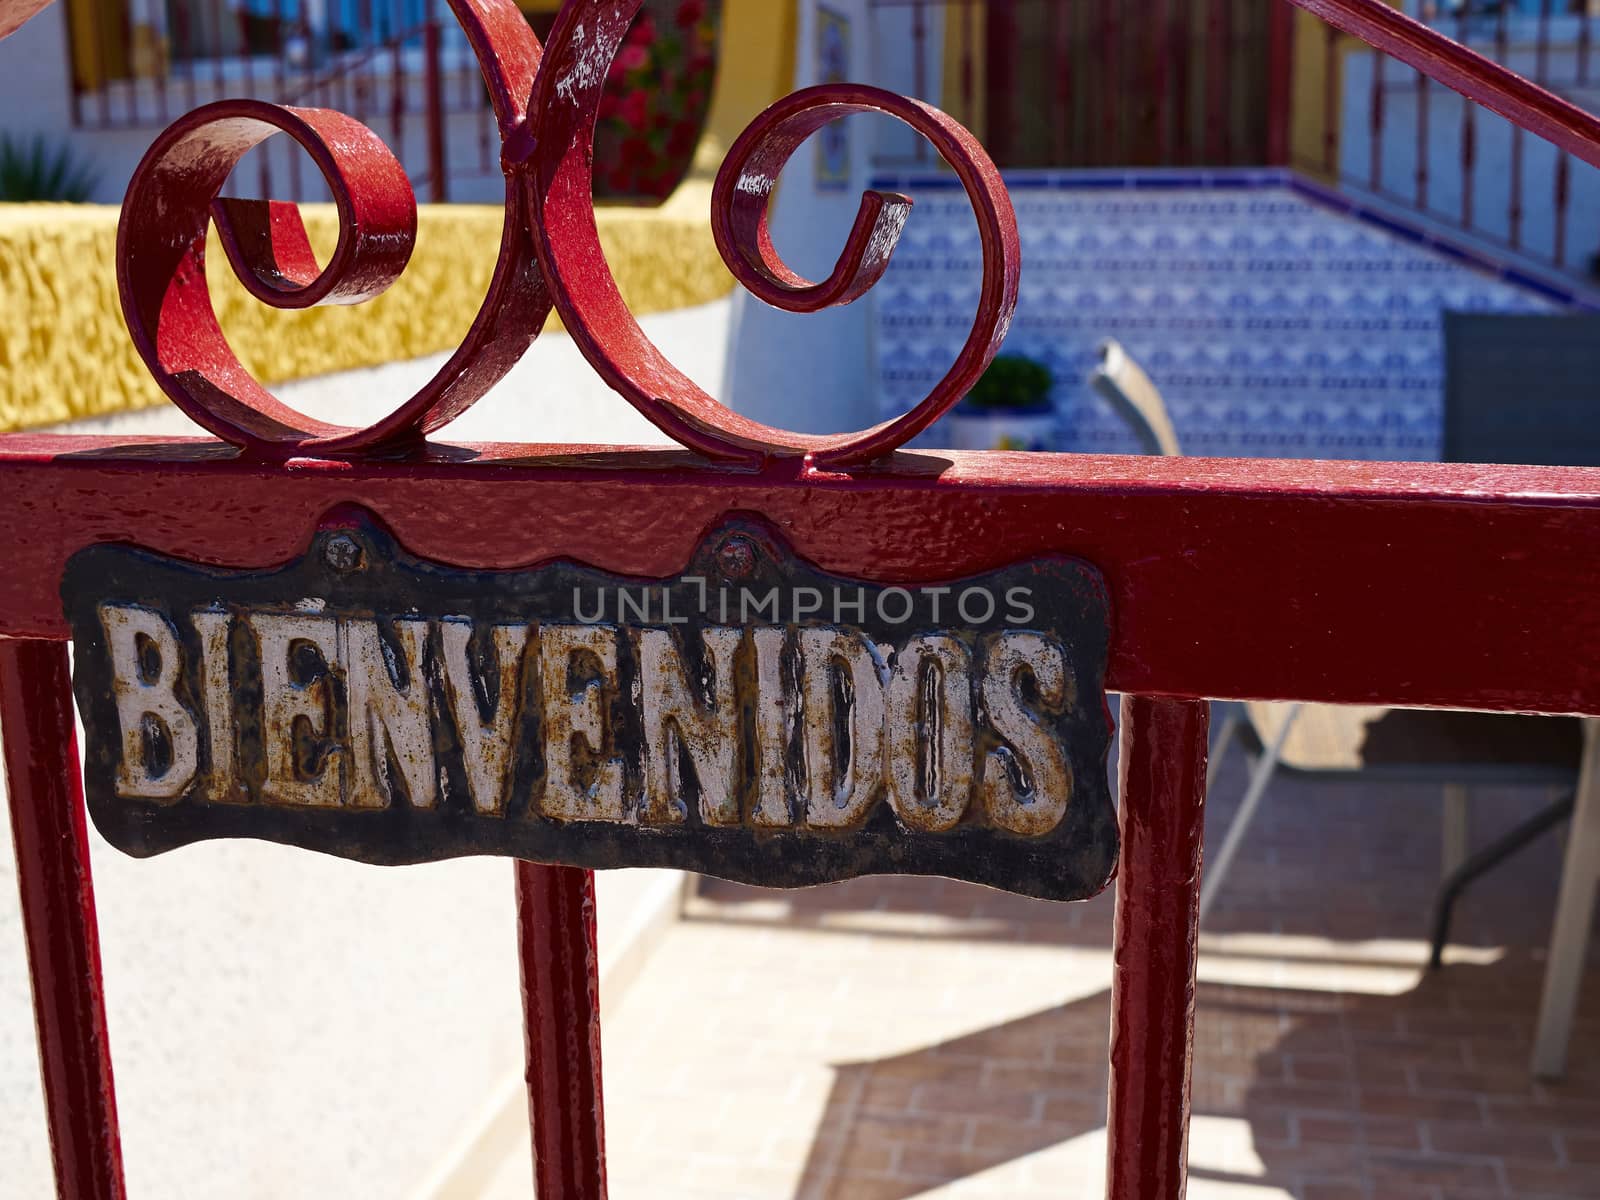 Welcome sign in Spanish Bienvenidos by Ronyzmbow